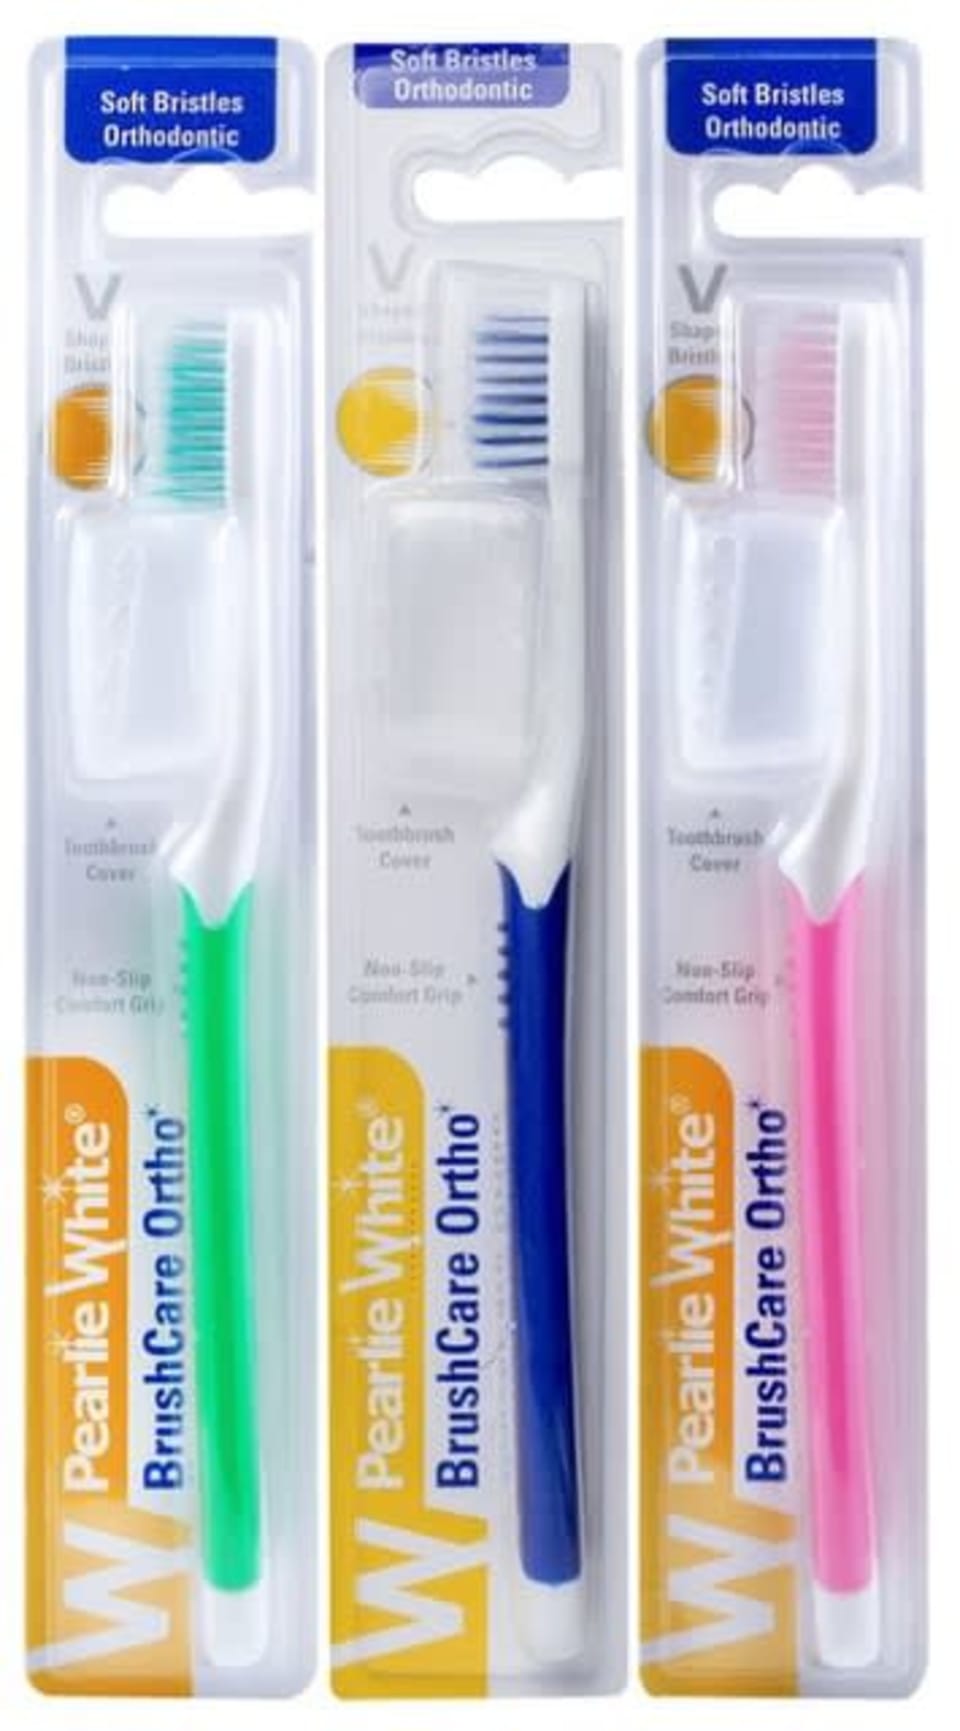 9 Best Toothbrushes in Singapore 2020 - Brands & Reviews